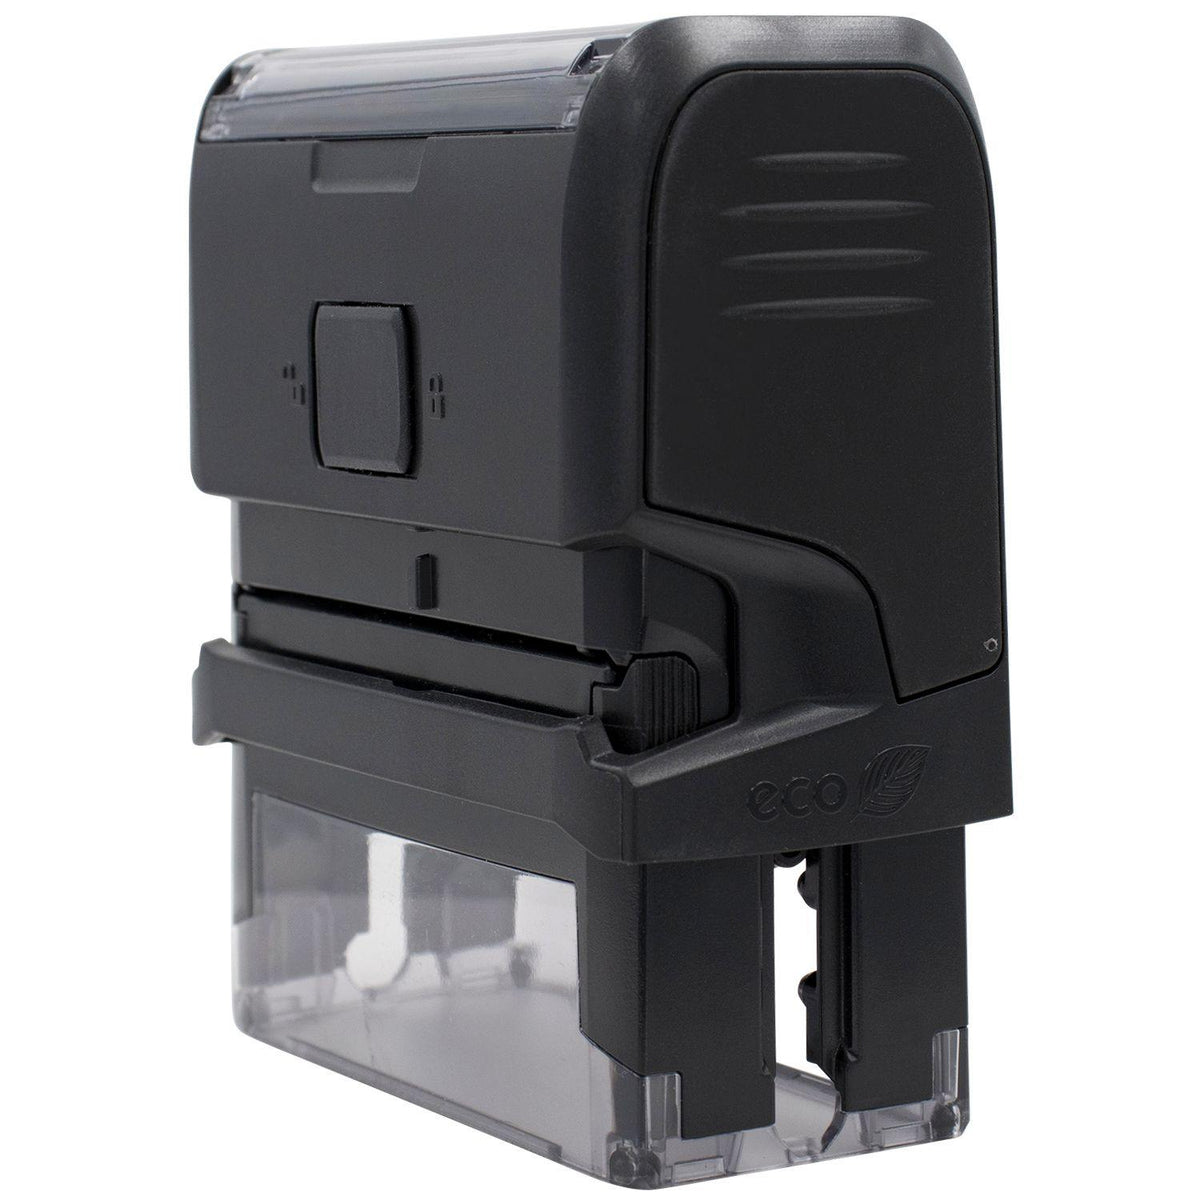 Large Self Inking Priority Stamp - Engineer Seal Stamps - Brand_Trodat, Impression Size_Large, Stamp Type_Self-Inking Stamp, Type of Use_Professional